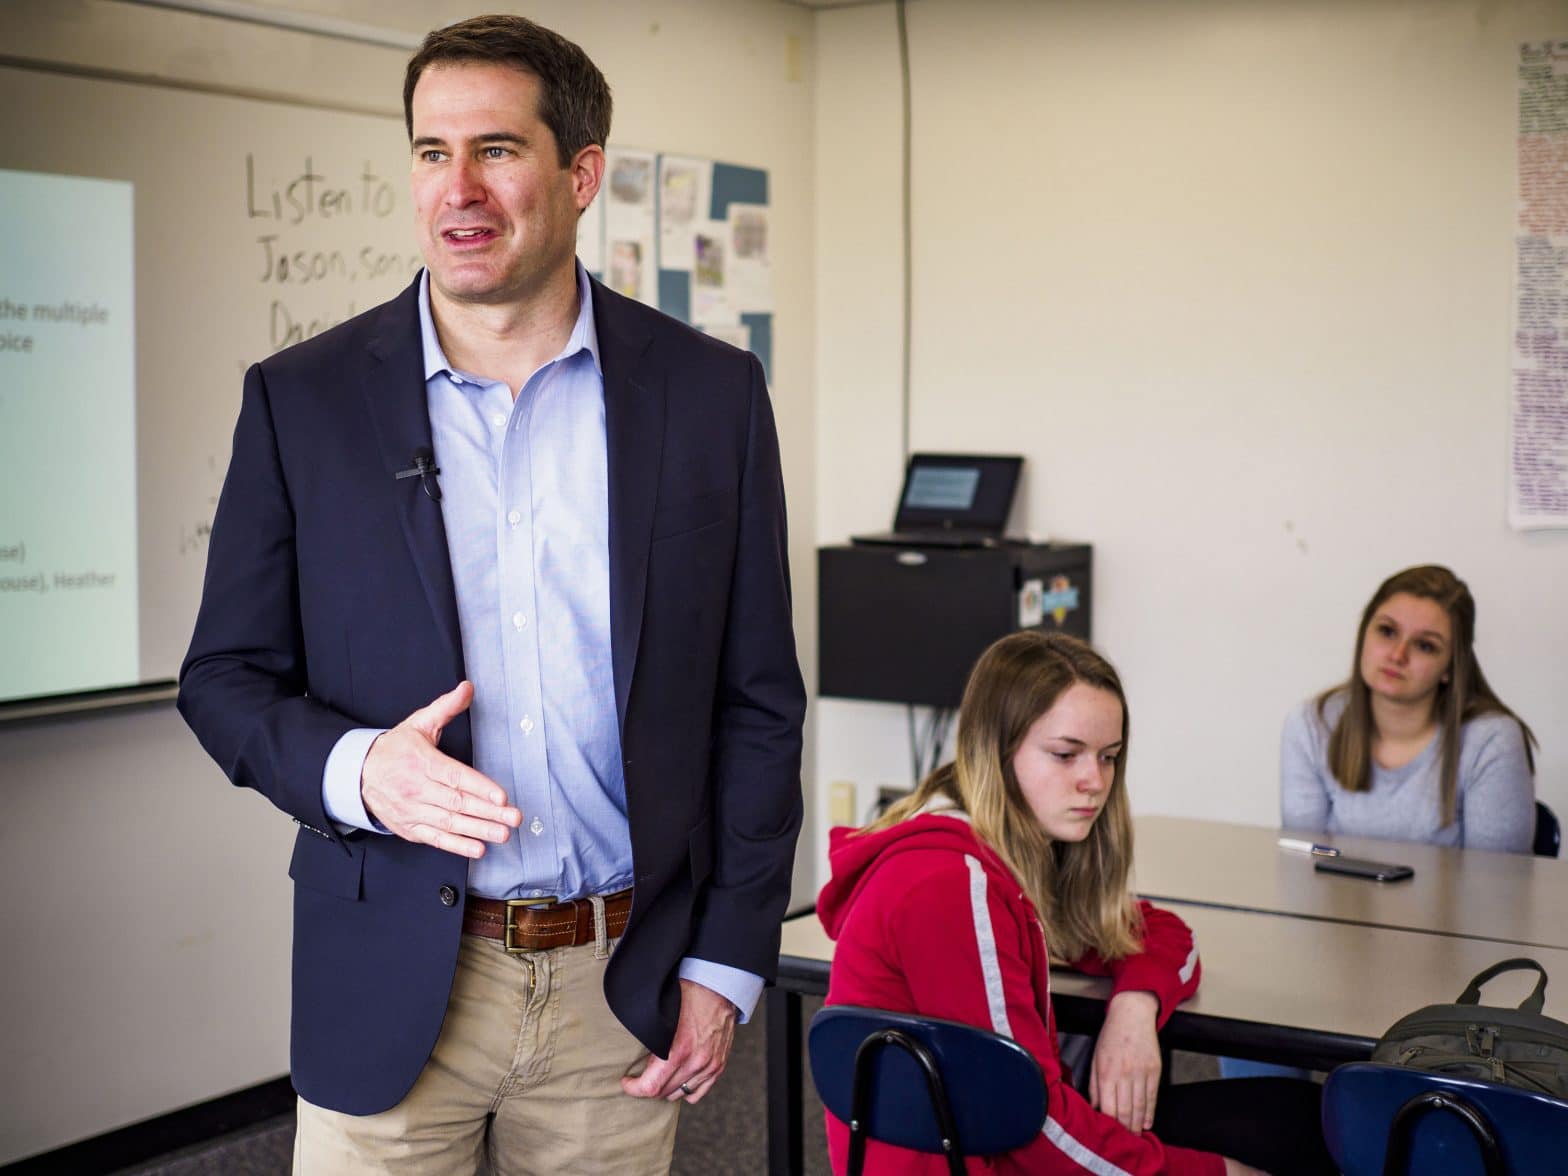 A Decorated Veteran, Seth Moulton’s Presidential Campaign Focuses on Defense and National Security